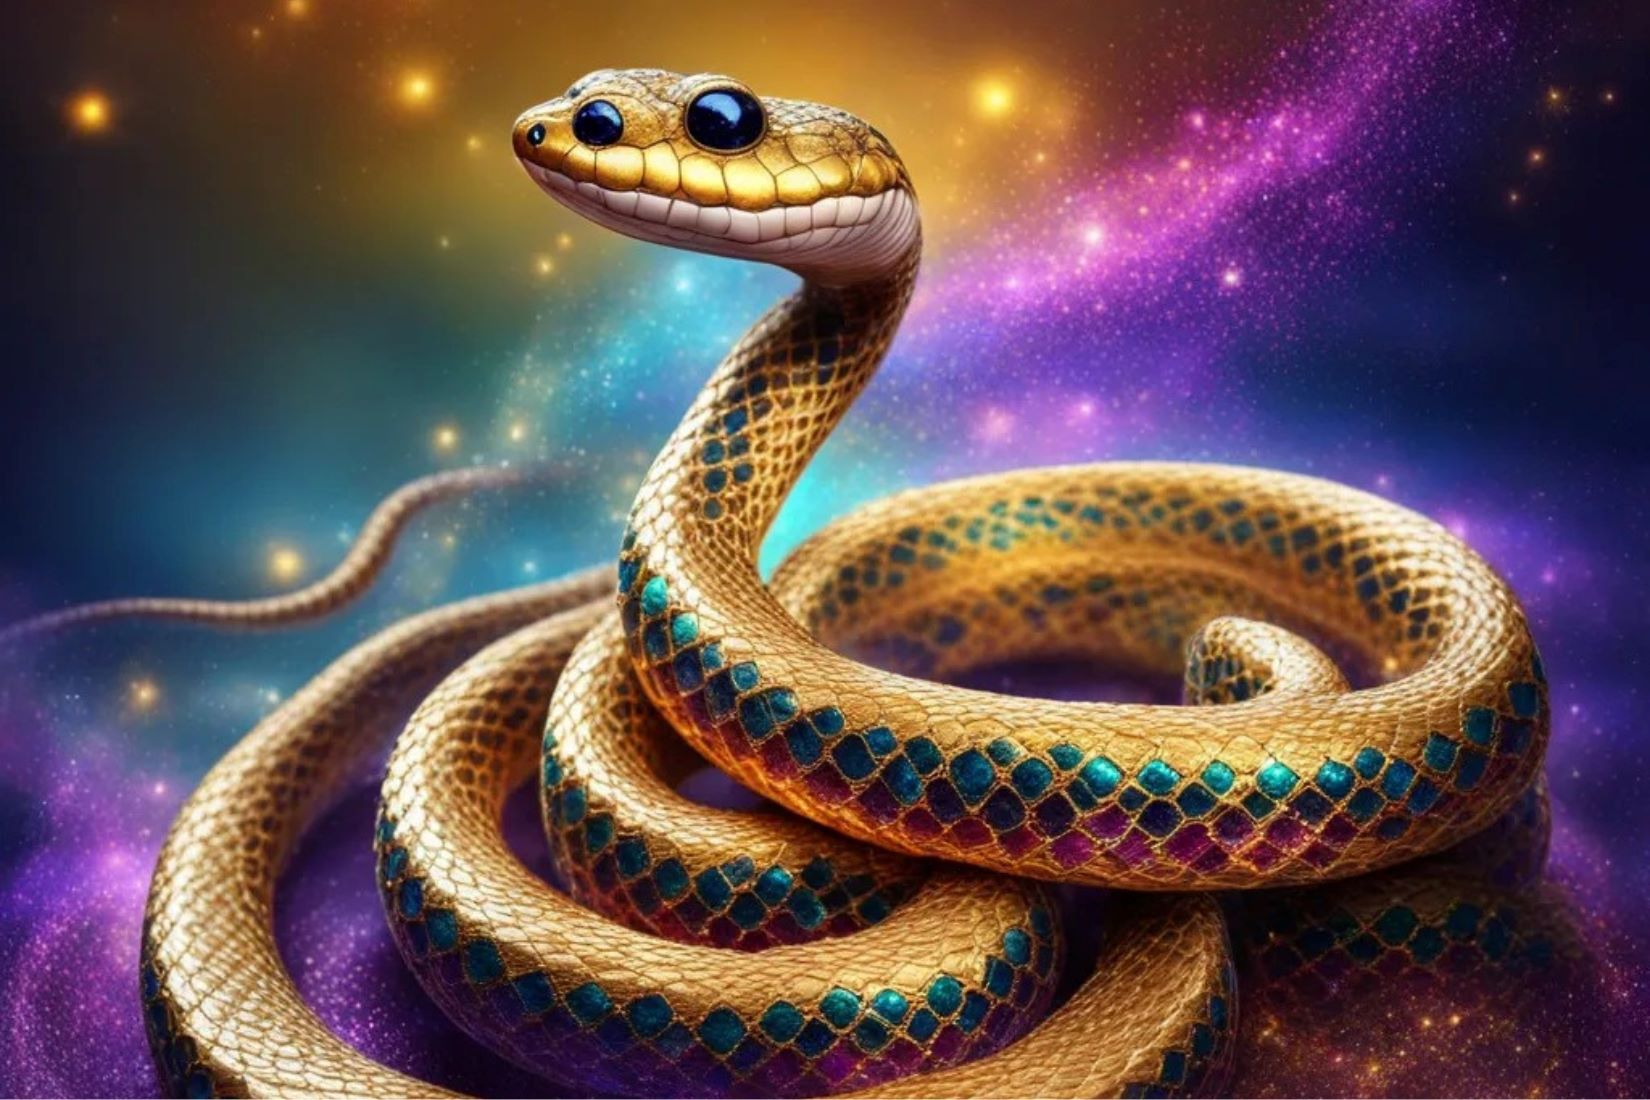 Discover The Meaning Behind Dreaming Of Harmless Snakes